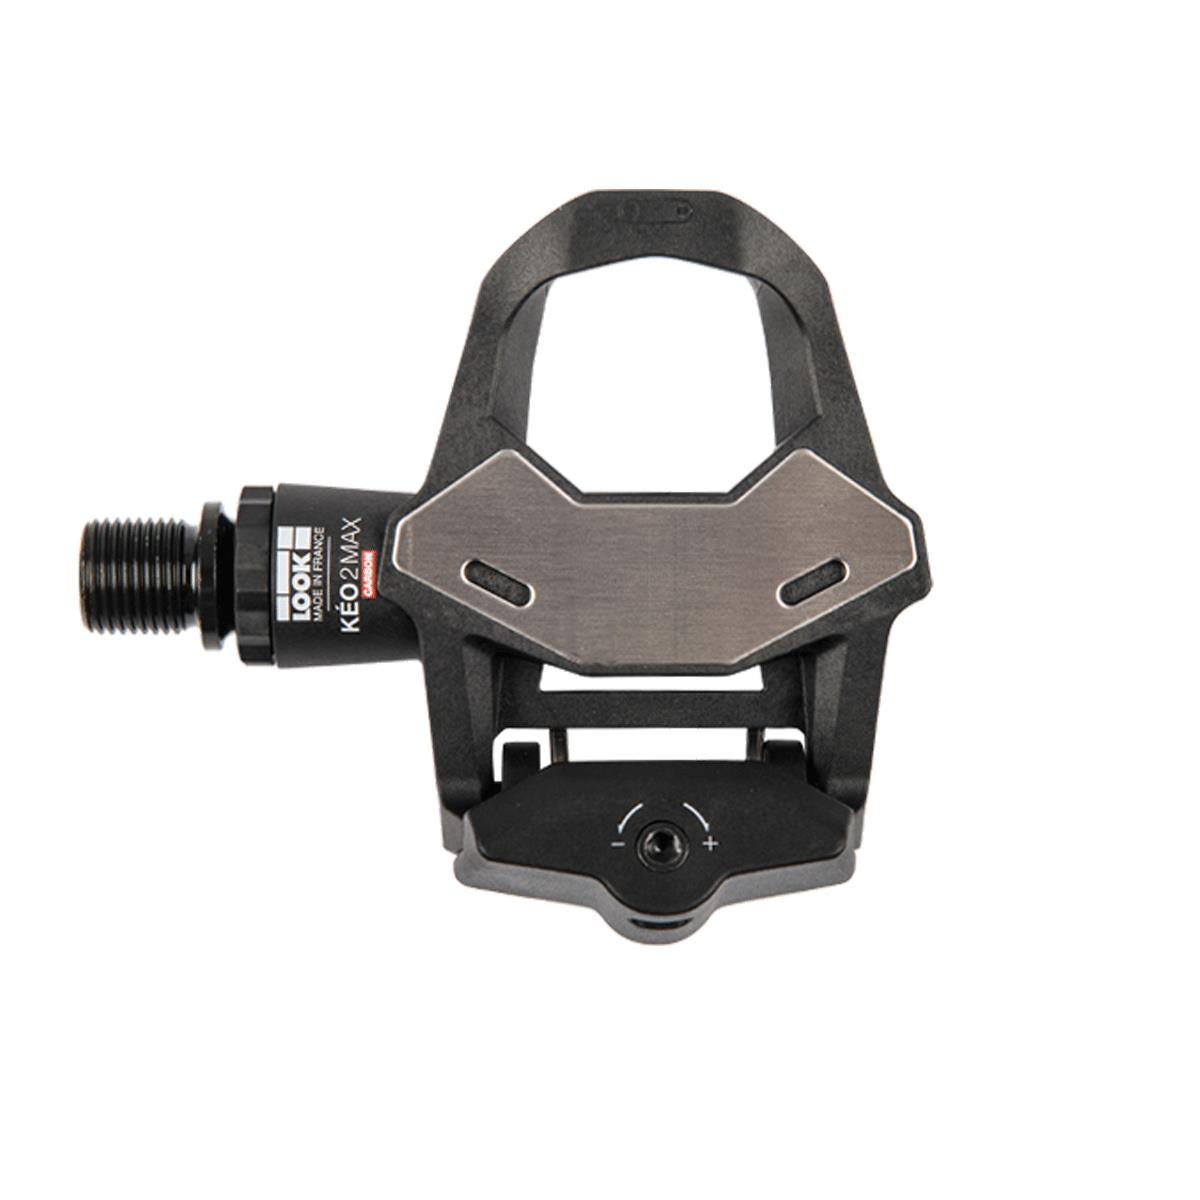 LOOK Keo 2 Max Carbon pedals with Keogrip cleat